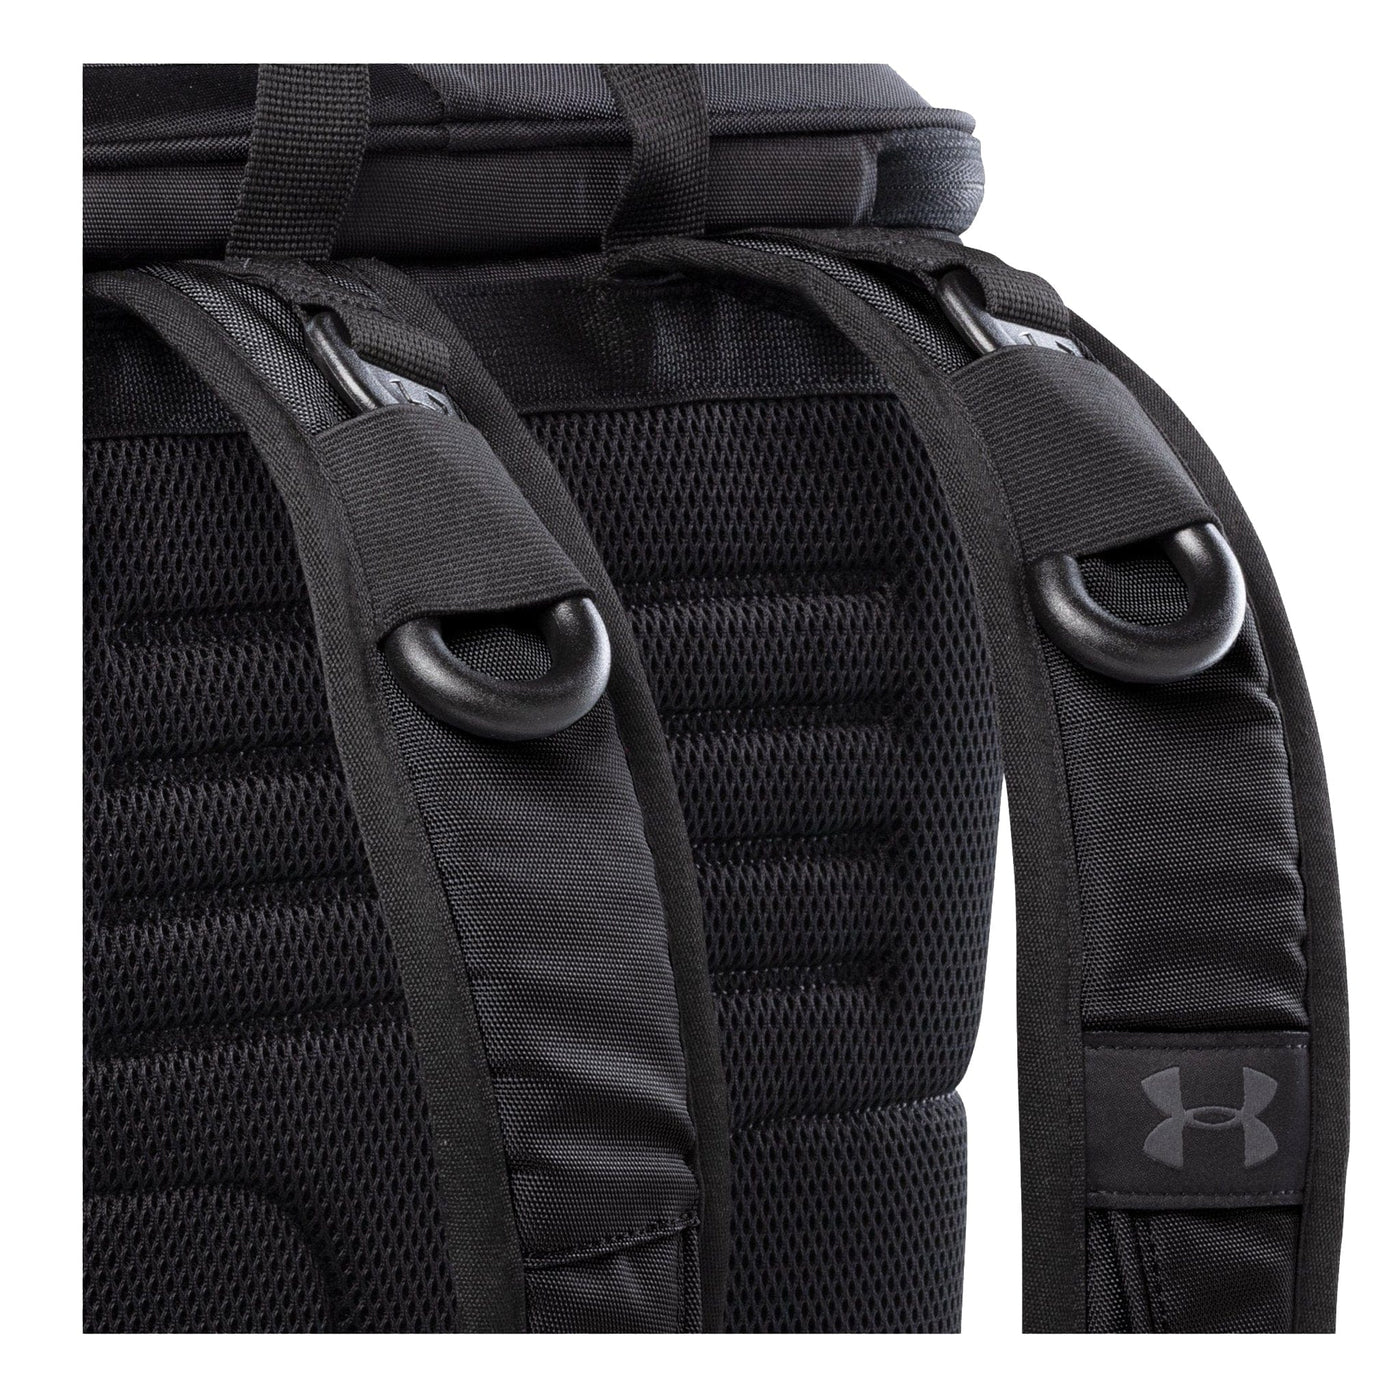 Under Armour 25-Can Backpack Cooler - The Hockey Shop Source For Sports